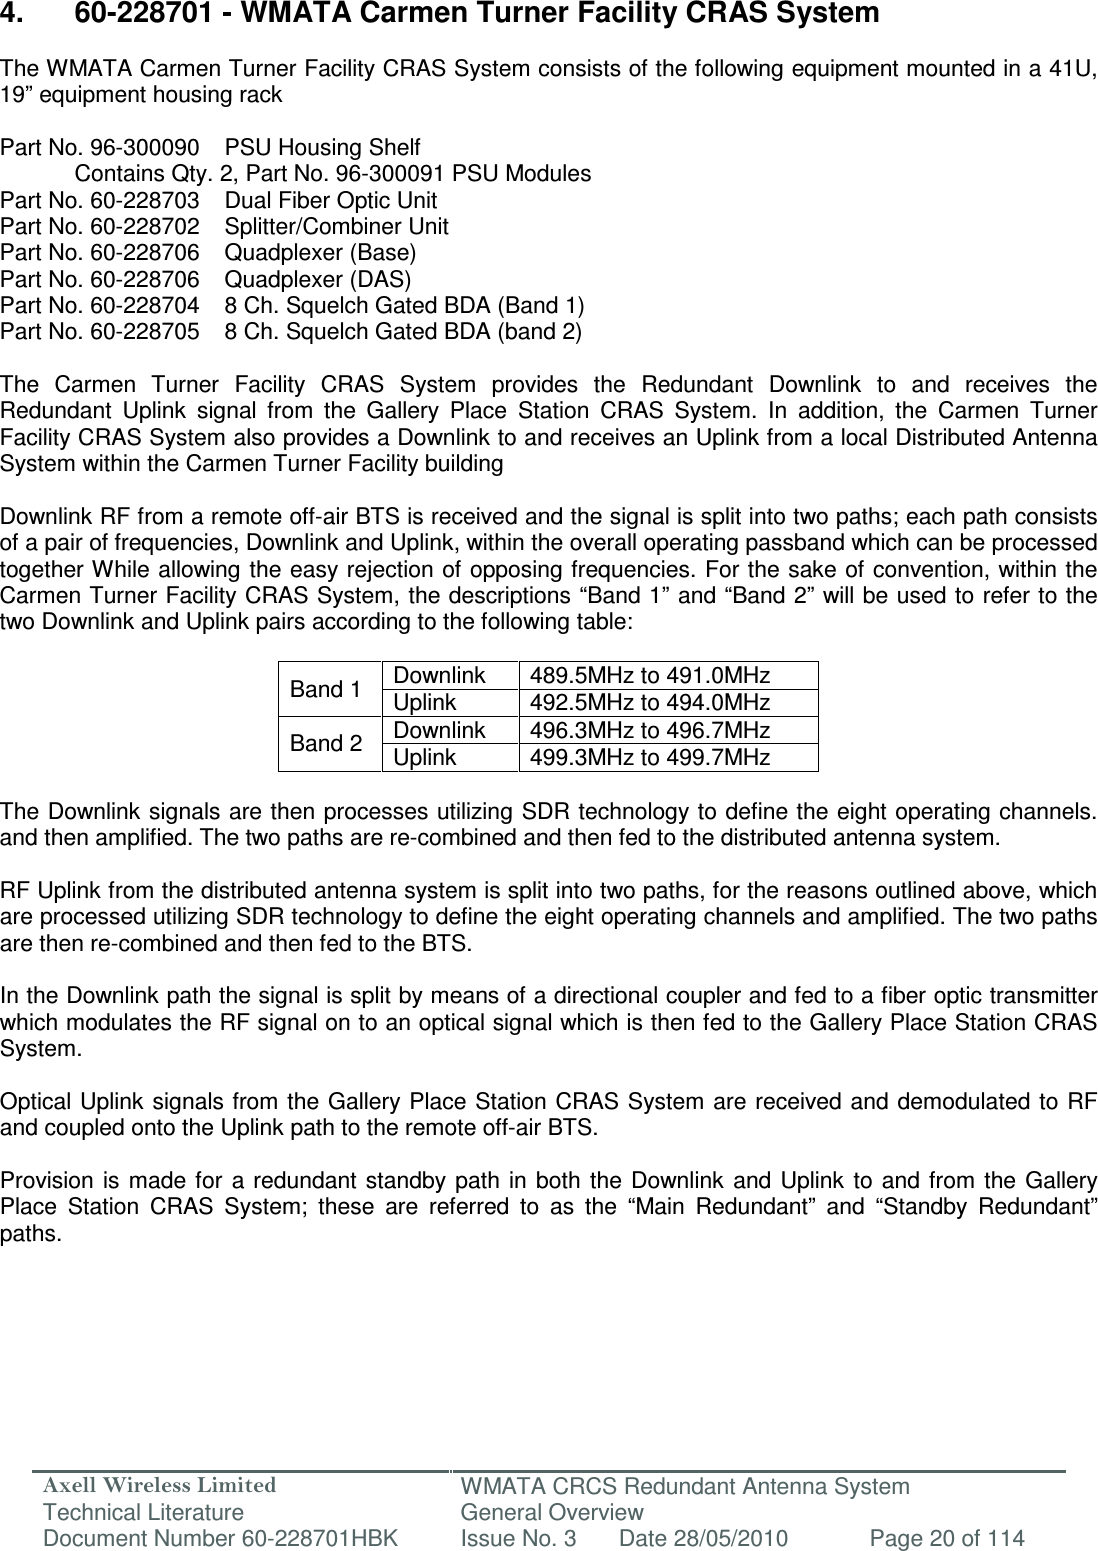 Axell Wireless Limited Technical Literature WMATA CRCS Redundant Antenna System General Overview Document Number 60-228701HBK  Issue No. 3  Date 28/05/2010  Page 20 of 114   4.  60-228701 - WMATA Carmen Turner Facility CRAS System  The WMATA Carmen Turner Facility CRAS System consists of the following equipment mounted in a 41U, 19” equipment housing rack  Part No. 96-300090  PSU Housing Shelf   Contains Qty. 2, Part No. 96-300091 PSU Modules Part No. 60-228703  Dual Fiber Optic Unit  Part No. 60-228702  Splitter/Combiner Unit  Part No. 60-228706  Quadplexer (Base)  Part No. 60-228706  Quadplexer (DAS)  Part No. 60-228704  8 Ch. Squelch Gated BDA (Band 1) Part No. 60-228705  8 Ch. Squelch Gated BDA (band 2)  The  Carmen  Turner  Facility  CRAS  System  provides  the  Redundant  Downlink  to  and  receives  the Redundant  Uplink  signal  from  the  Gallery  Place  Station  CRAS  System.  In  addition,  the  Carmen  Turner Facility CRAS System also provides a Downlink to and receives an Uplink from a local Distributed Antenna System within the Carmen Turner Facility building  Downlink RF from a remote off-air BTS is received and the signal is split into two paths; each path consists of a pair of frequencies, Downlink and Uplink, within the overall operating passband which can be processed together While allowing the easy rejection of opposing frequencies. For the sake of convention, within the Carmen Turner Facility CRAS System, the descriptions “Band 1” and “Band 2” will be used to refer to the two Downlink and Uplink pairs according to the following table:  Band 1  Downlink  489.5MHz to 491.0MHz Uplink  492.5MHz to 494.0MHz Band 2  Downlink  496.3MHz to 496.7MHz Uplink  499.3MHz to 499.7MHz  The Downlink signals are then processes utilizing SDR technology to define the eight operating channels. and then amplified. The two paths are re-combined and then fed to the distributed antenna system.  RF Uplink from the distributed antenna system is split into two paths, for the reasons outlined above, which are processed utilizing SDR technology to define the eight operating channels and amplified. The two paths are then re-combined and then fed to the BTS.   In the Downlink path the signal is split by means of a directional coupler and fed to a fiber optic transmitter which modulates the RF signal on to an optical signal which is then fed to the Gallery Place Station CRAS System.  Optical Uplink signals from the Gallery Place Station CRAS System are received and demodulated to  RF and coupled onto the Uplink path to the remote off-air BTS.  Provision is  made for a redundant  standby  path  in  both the  Downlink and  Uplink to  and from  the  Gallery Place  Station  CRAS  System;  these  are  referred  to  as  the  “Main  Redundant”  and  “Standby  Redundant” paths.  